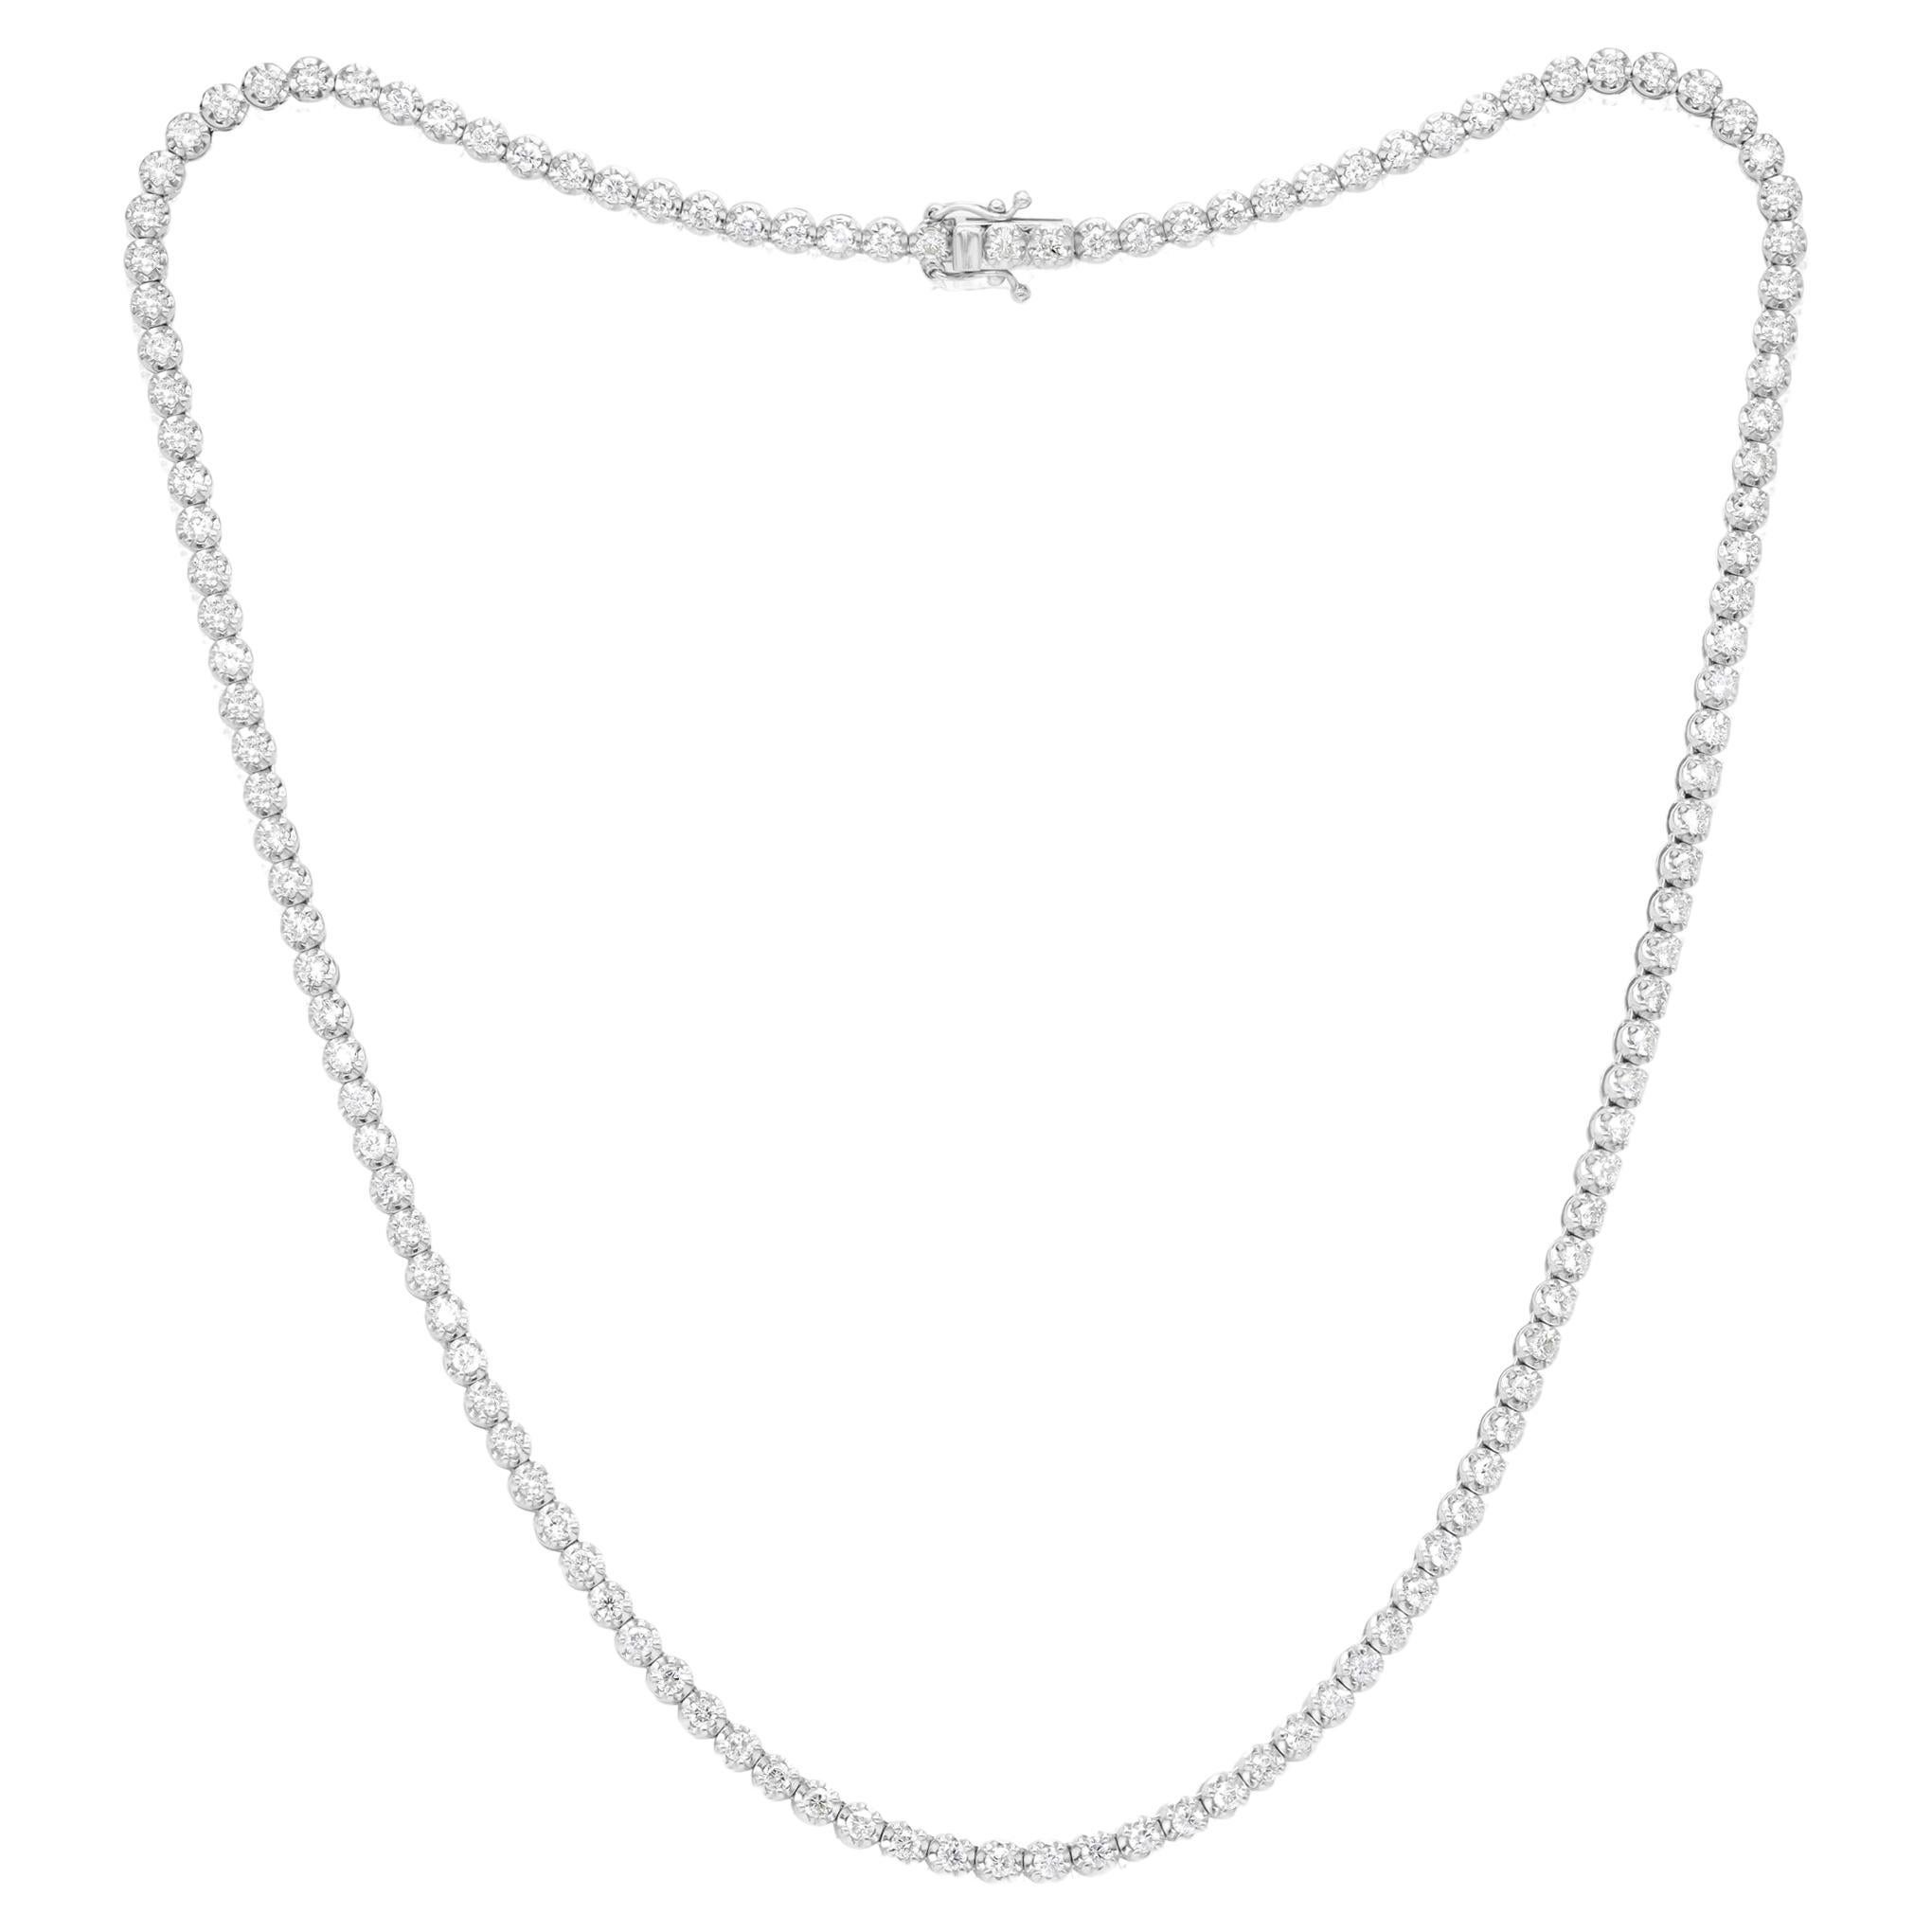 Diana M. 14 kt white gold, 17" 4 prong diamond tennis necklace featuring 4.00 ct